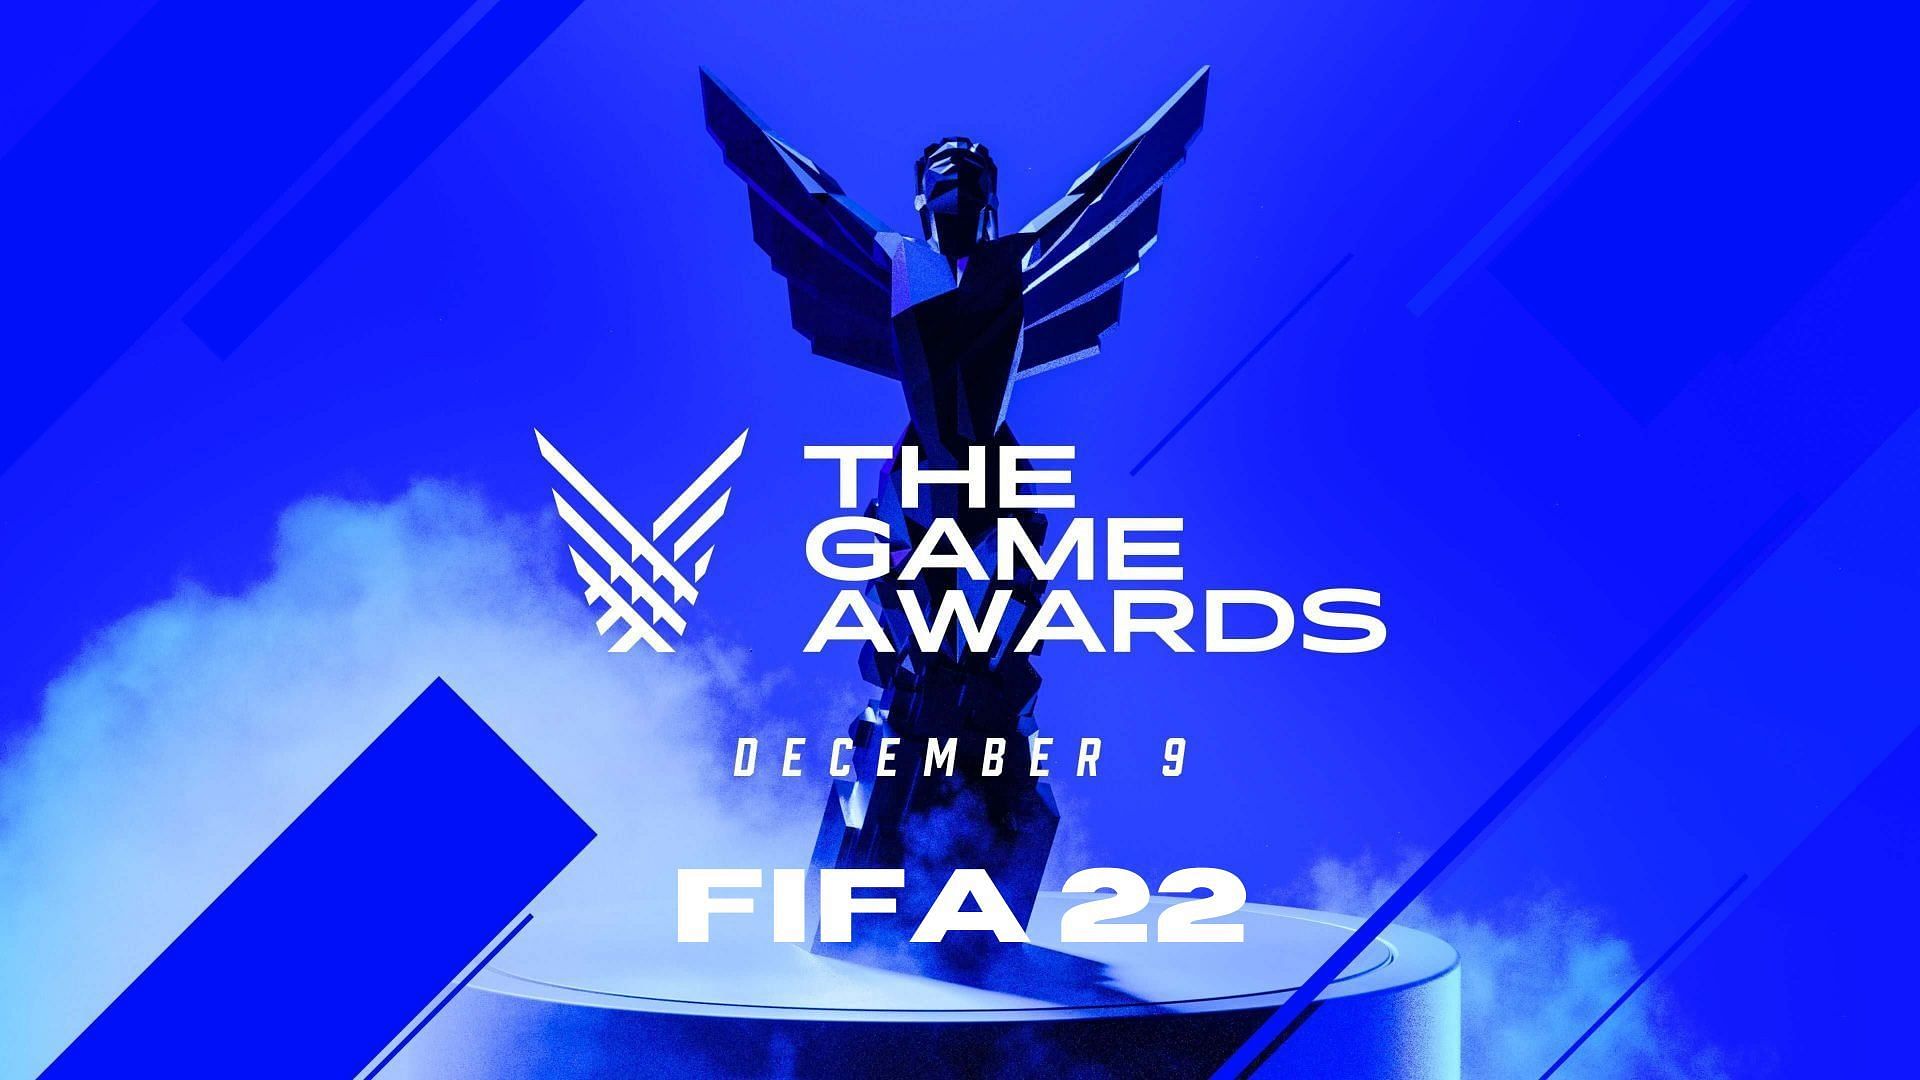 FIFA 22 has been nominated in The Game Awards 2021 (Image via Sportskeeda)